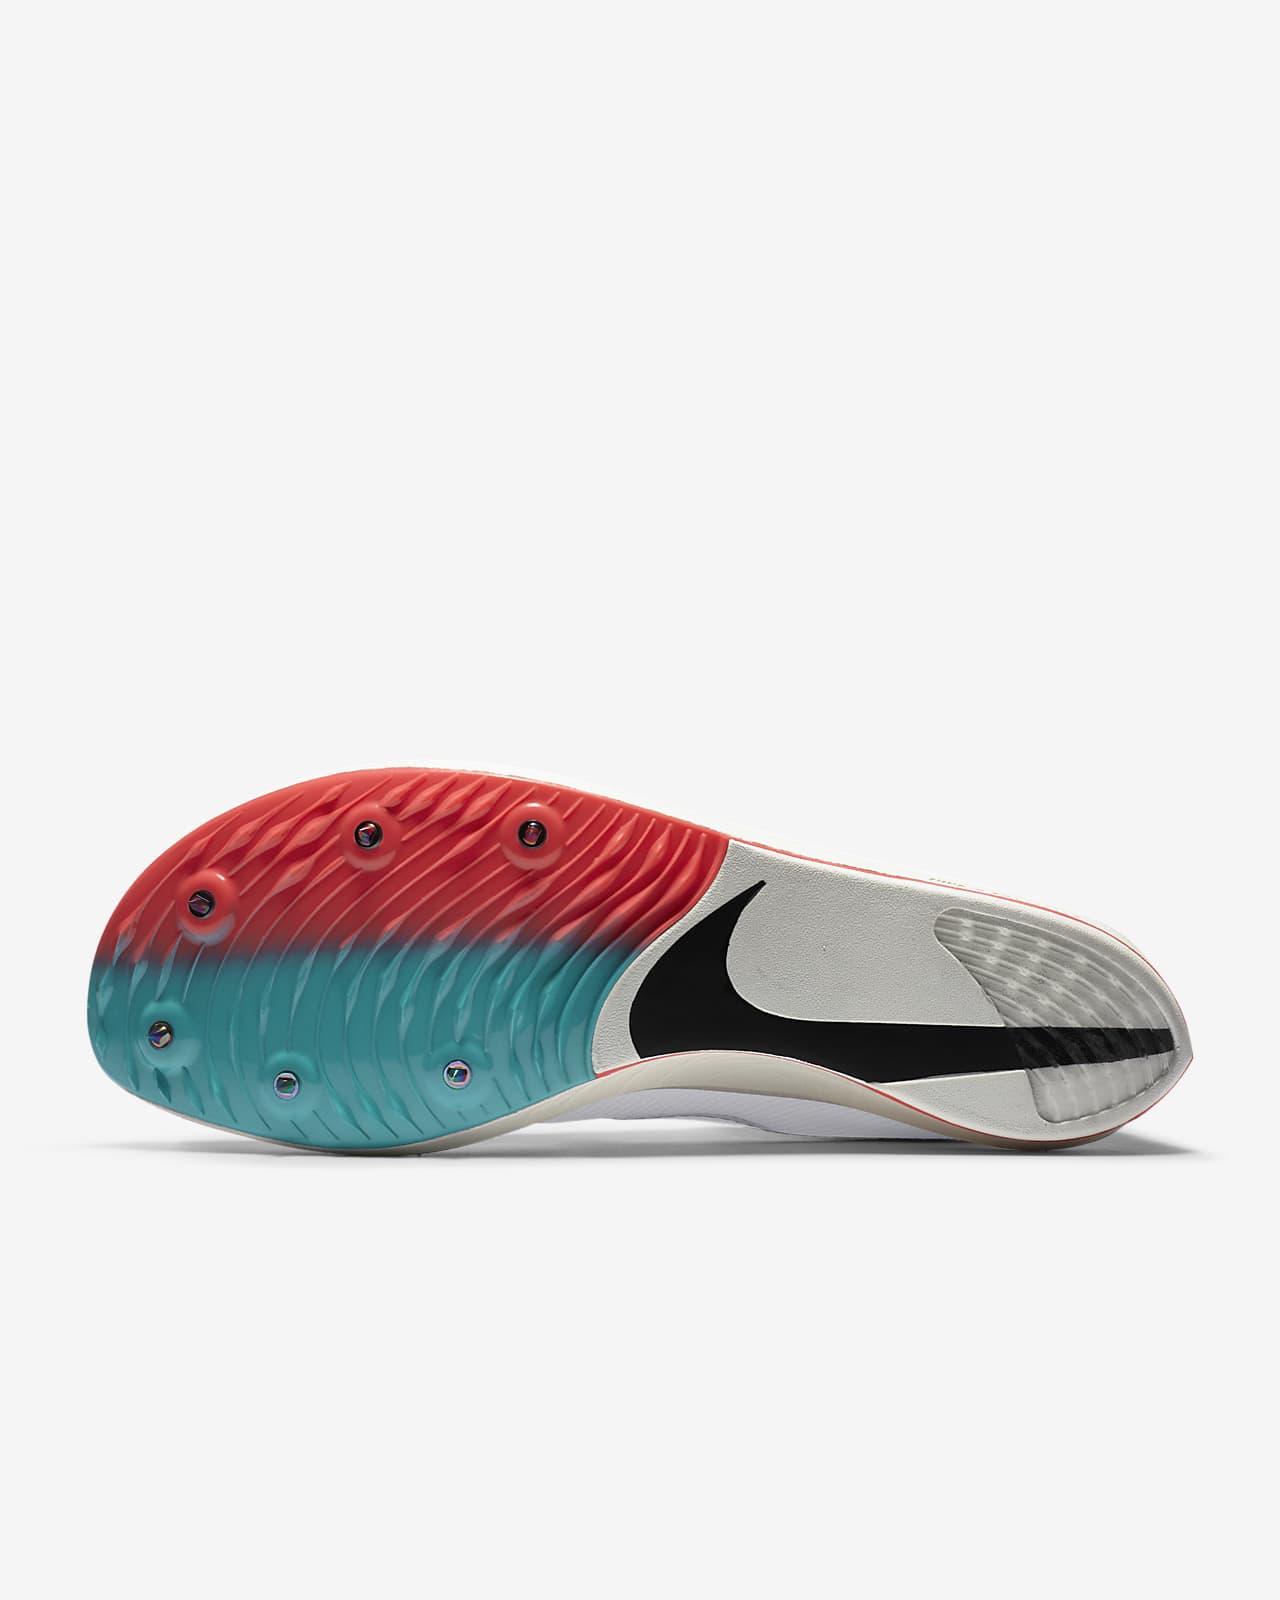 nike zoomx dragonfly for sale